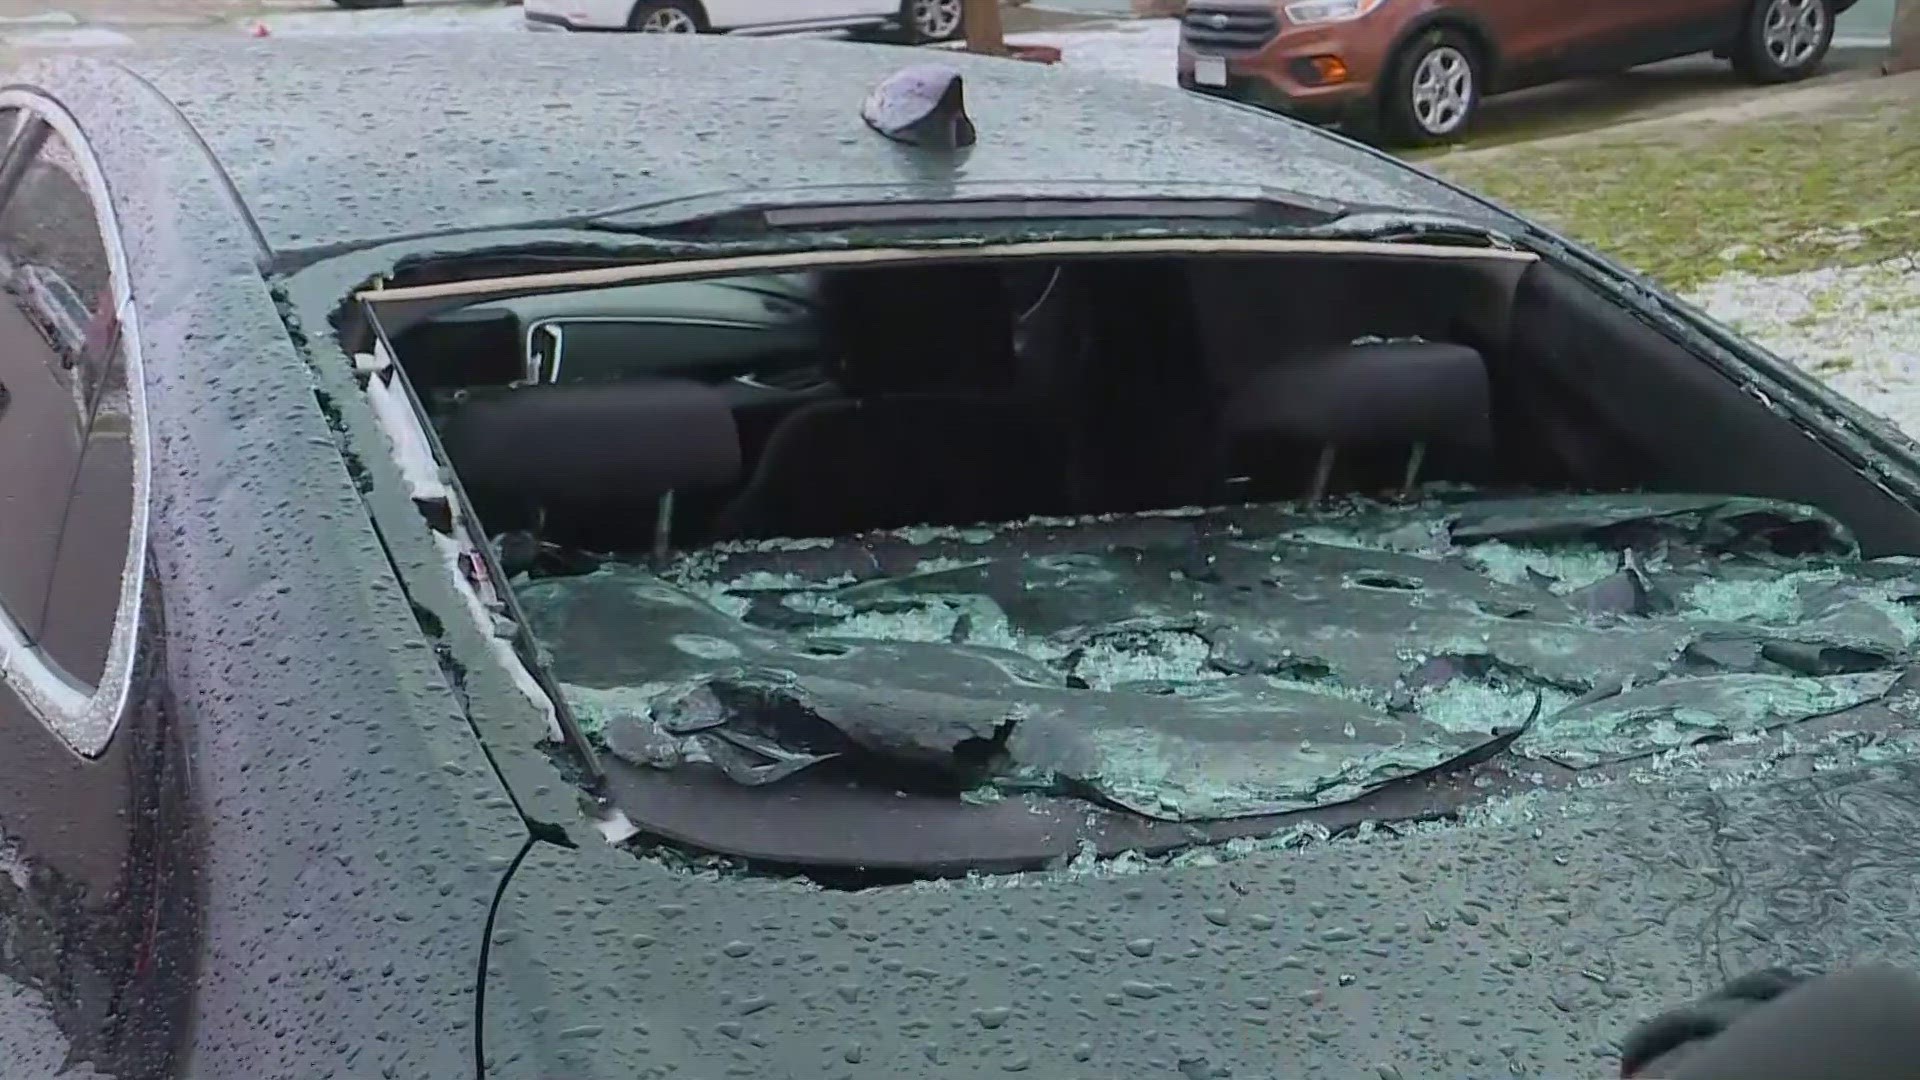 A hail storm that hit northern Colorado late Tuesday damaged multiple vehicles in Erie's Grandview neighborhood.